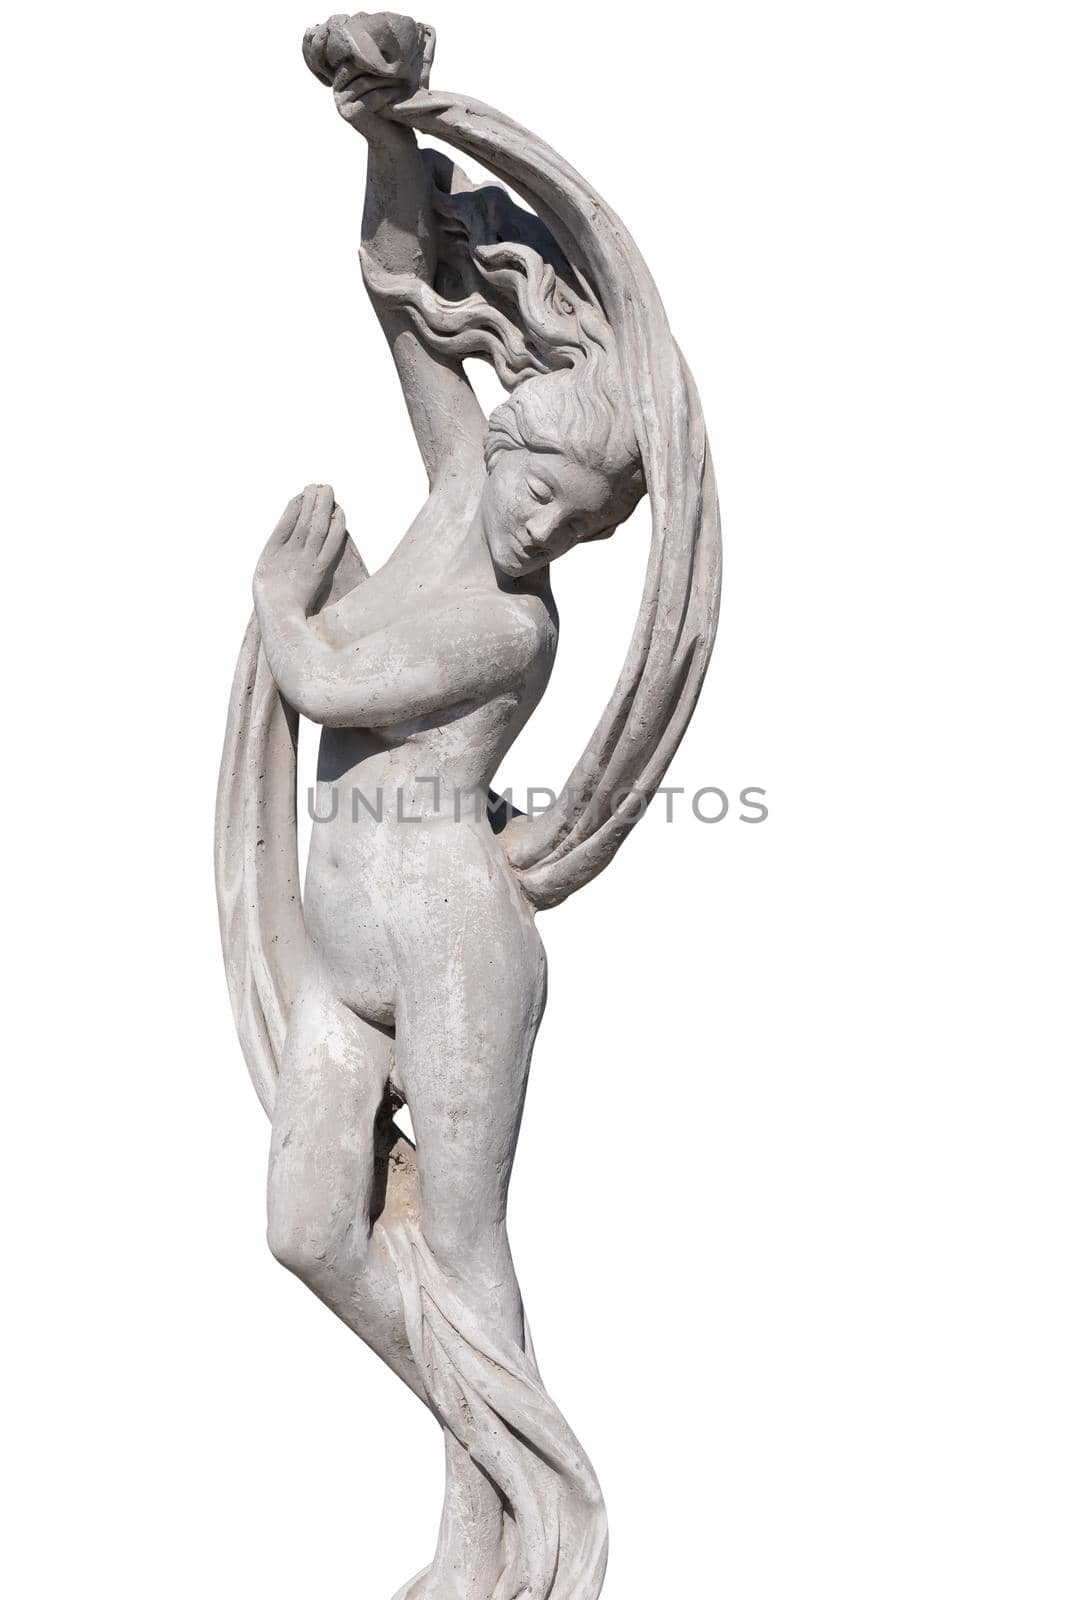 Stone sculpture of naked woman holding fabric on white background. art and classical style romantic figurative stone sculpture.